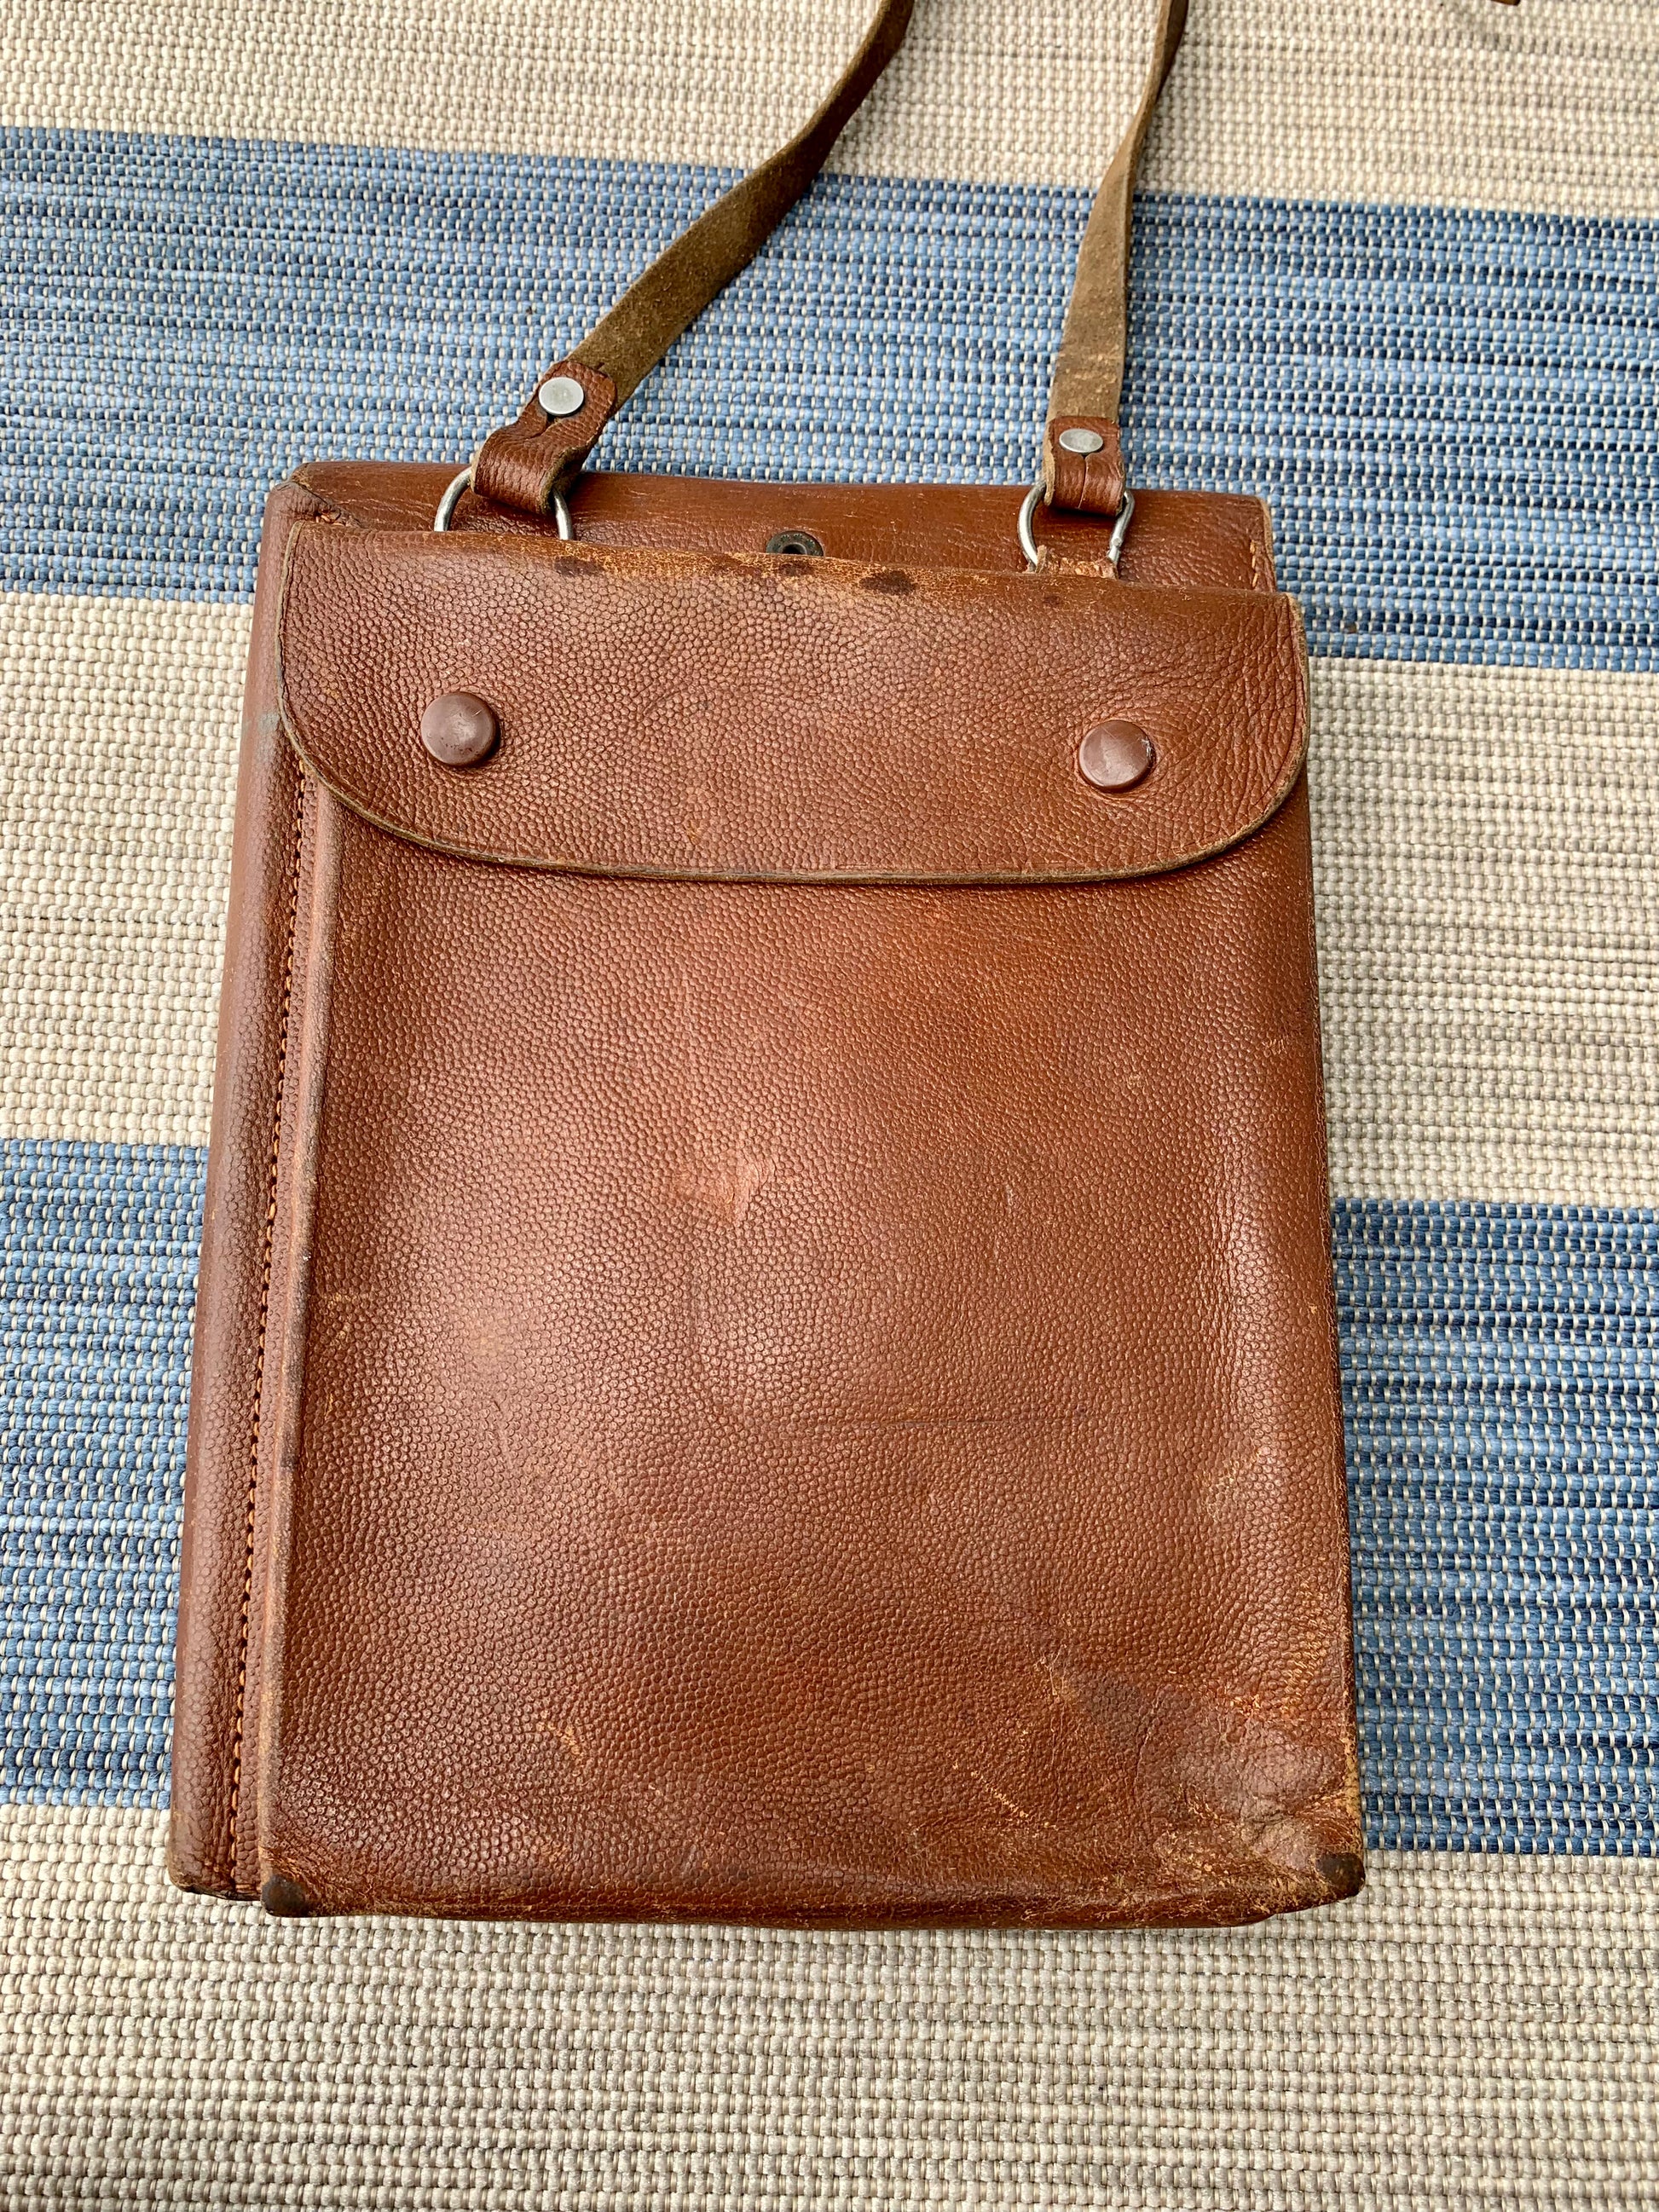 WWII German Named Officer Leather Map Case with Intact Drafting Supplies